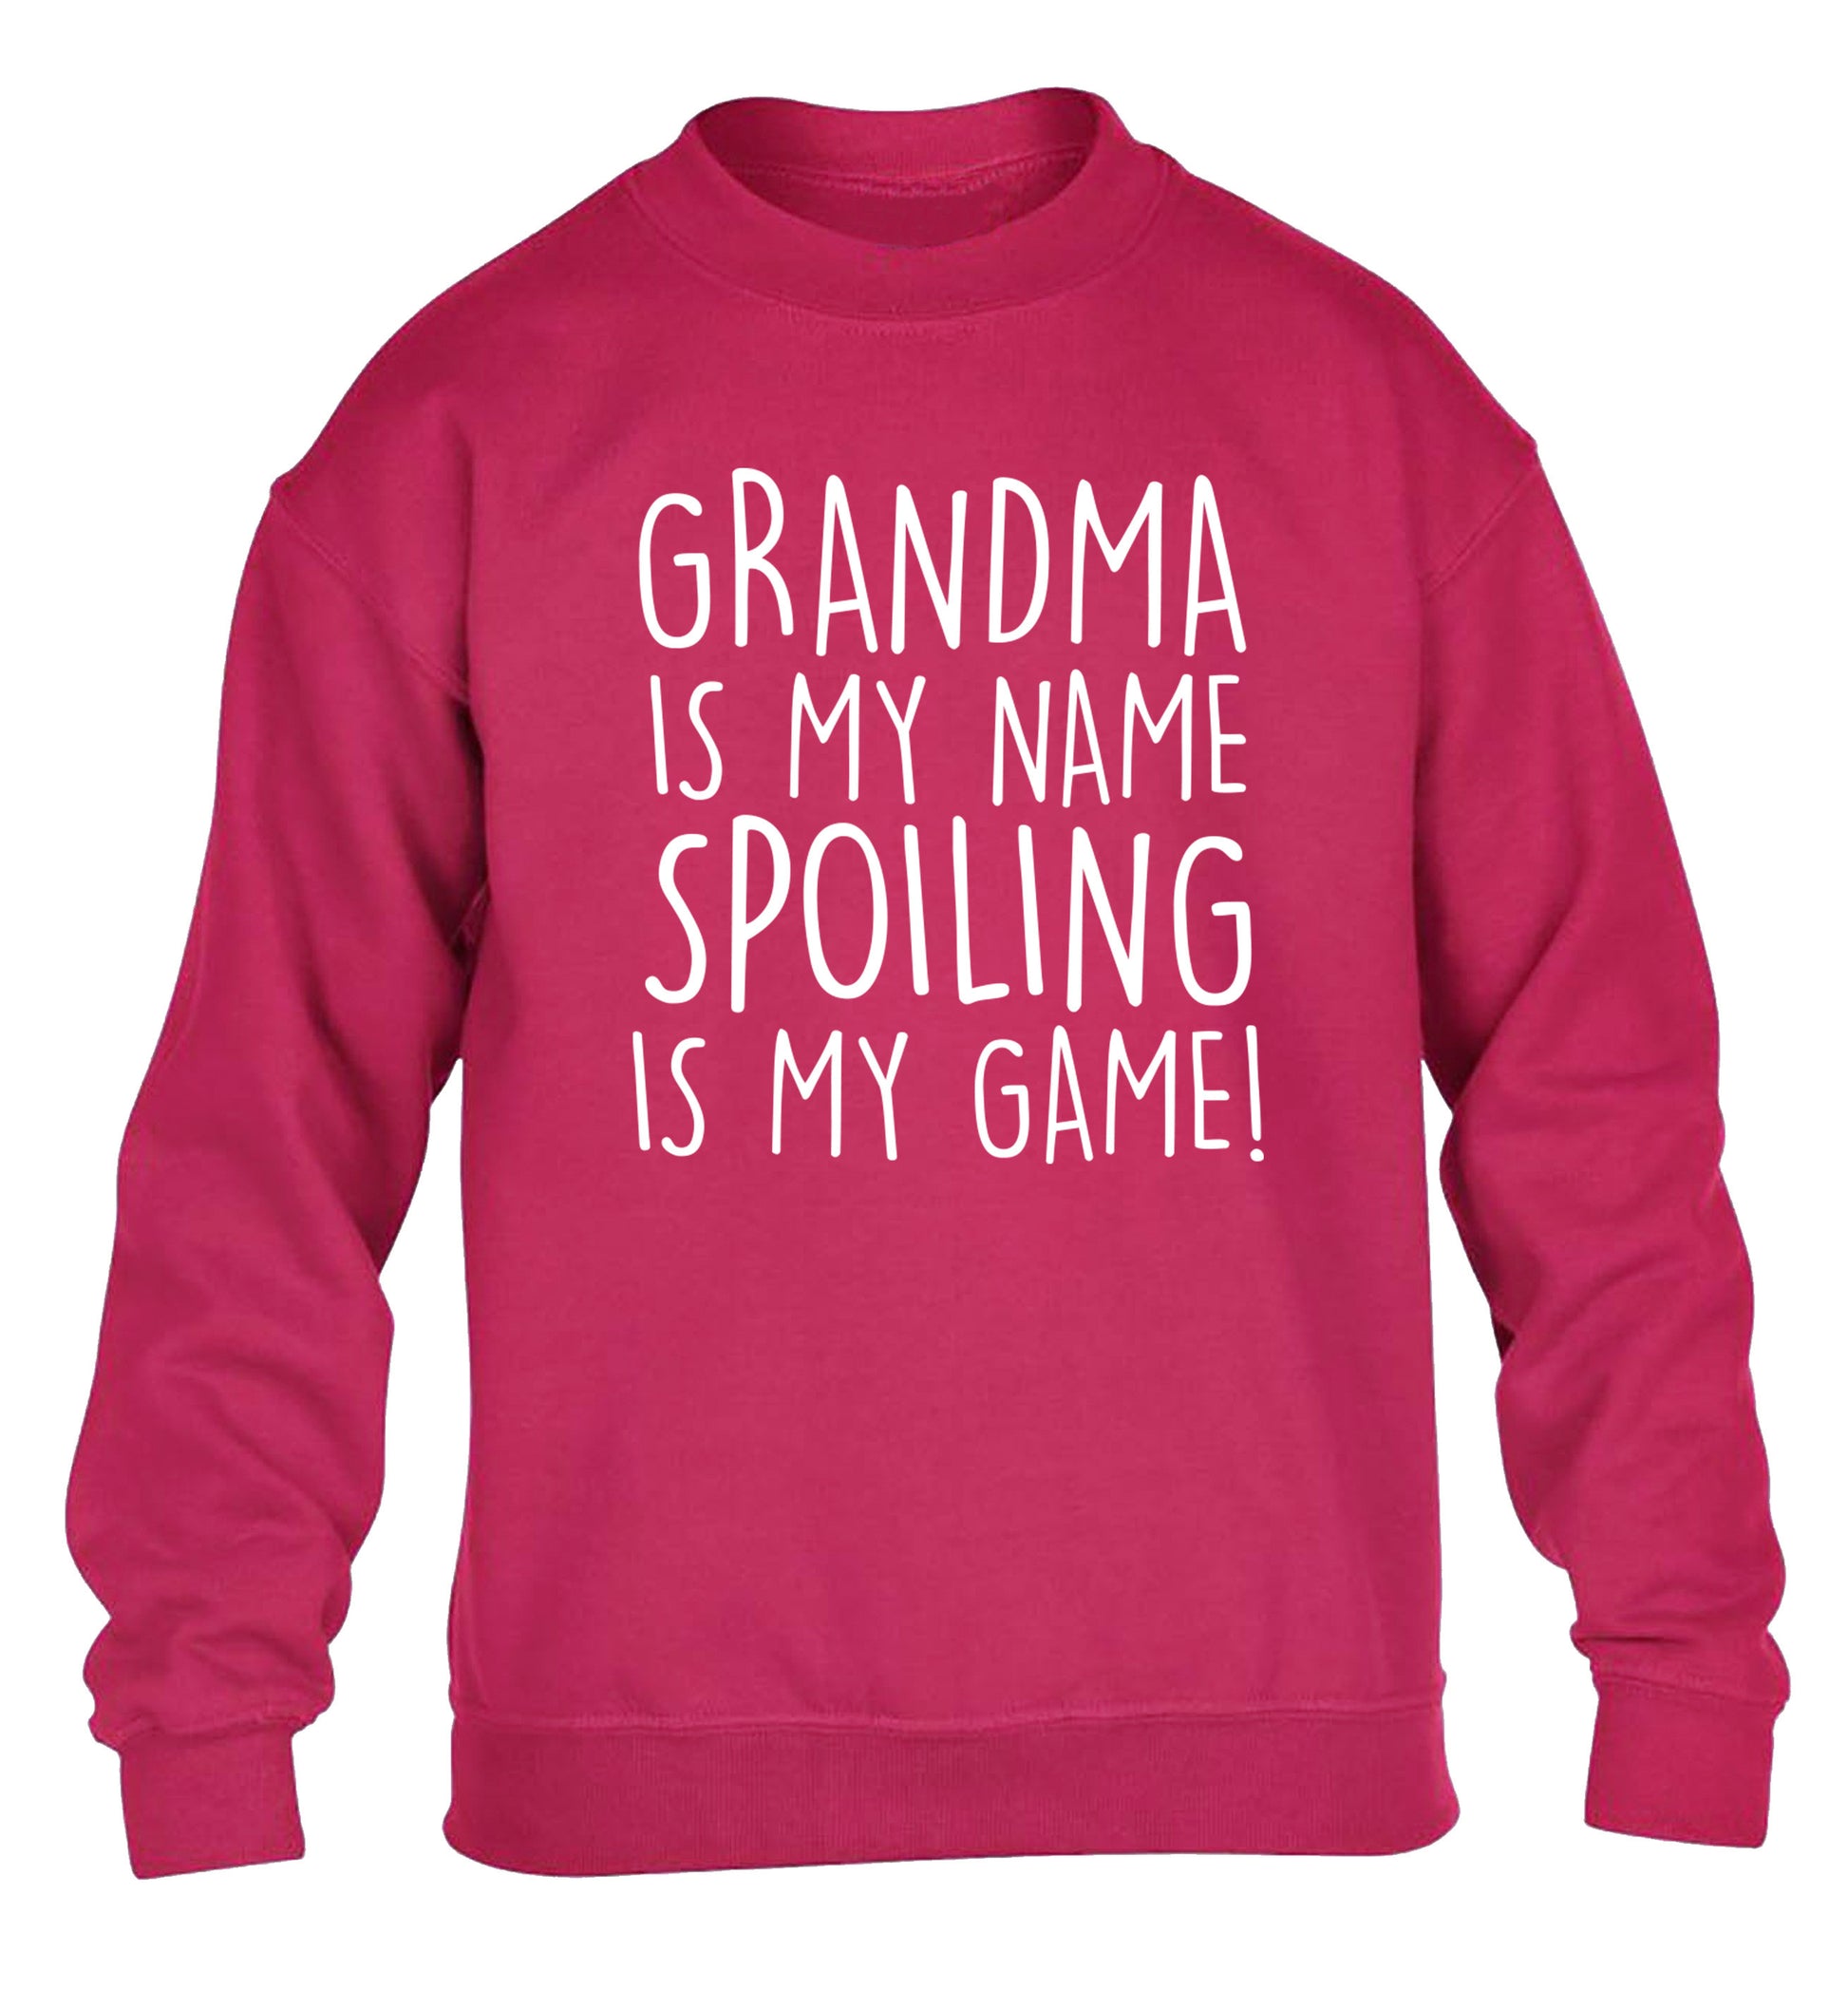 Grandma is my name, spoiling is my game children's pink sweater 12-14 Years